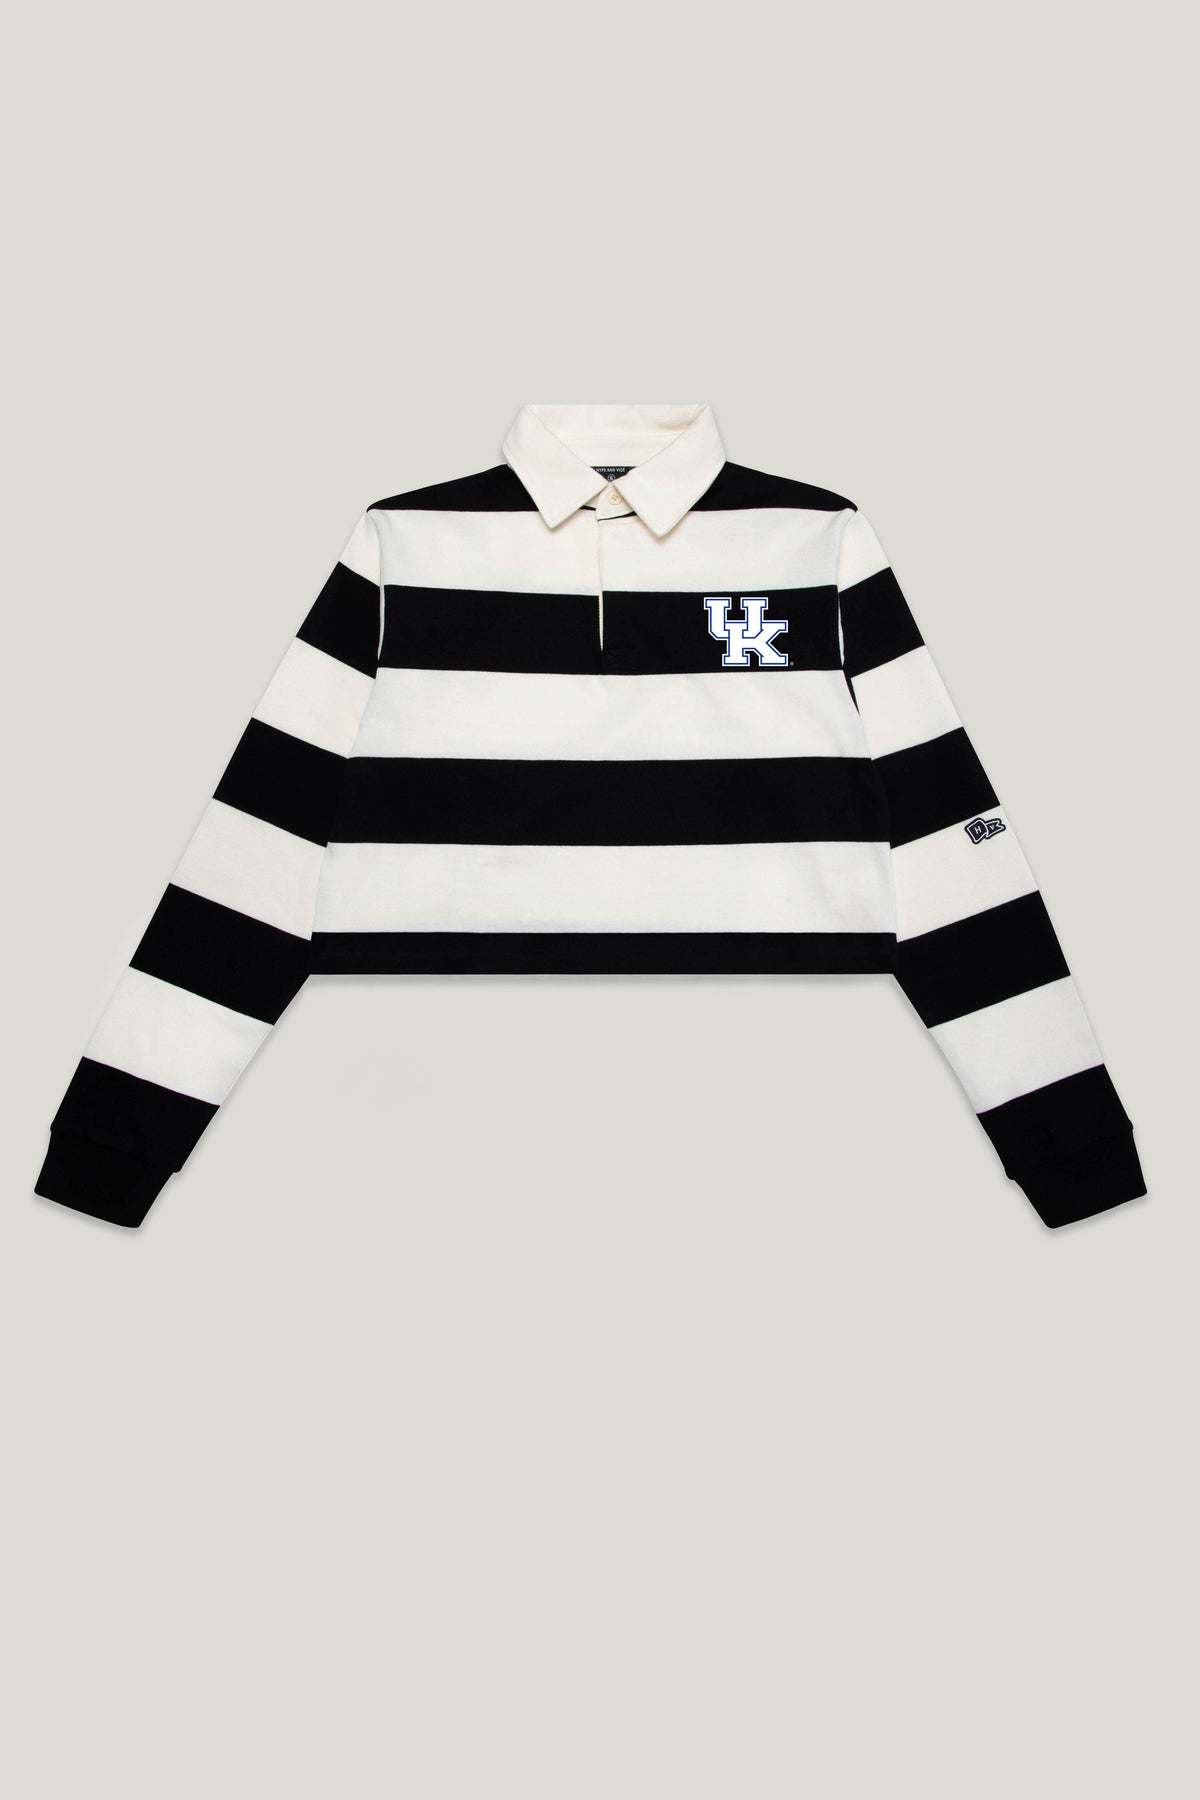 University of Kentucky Rugby Top